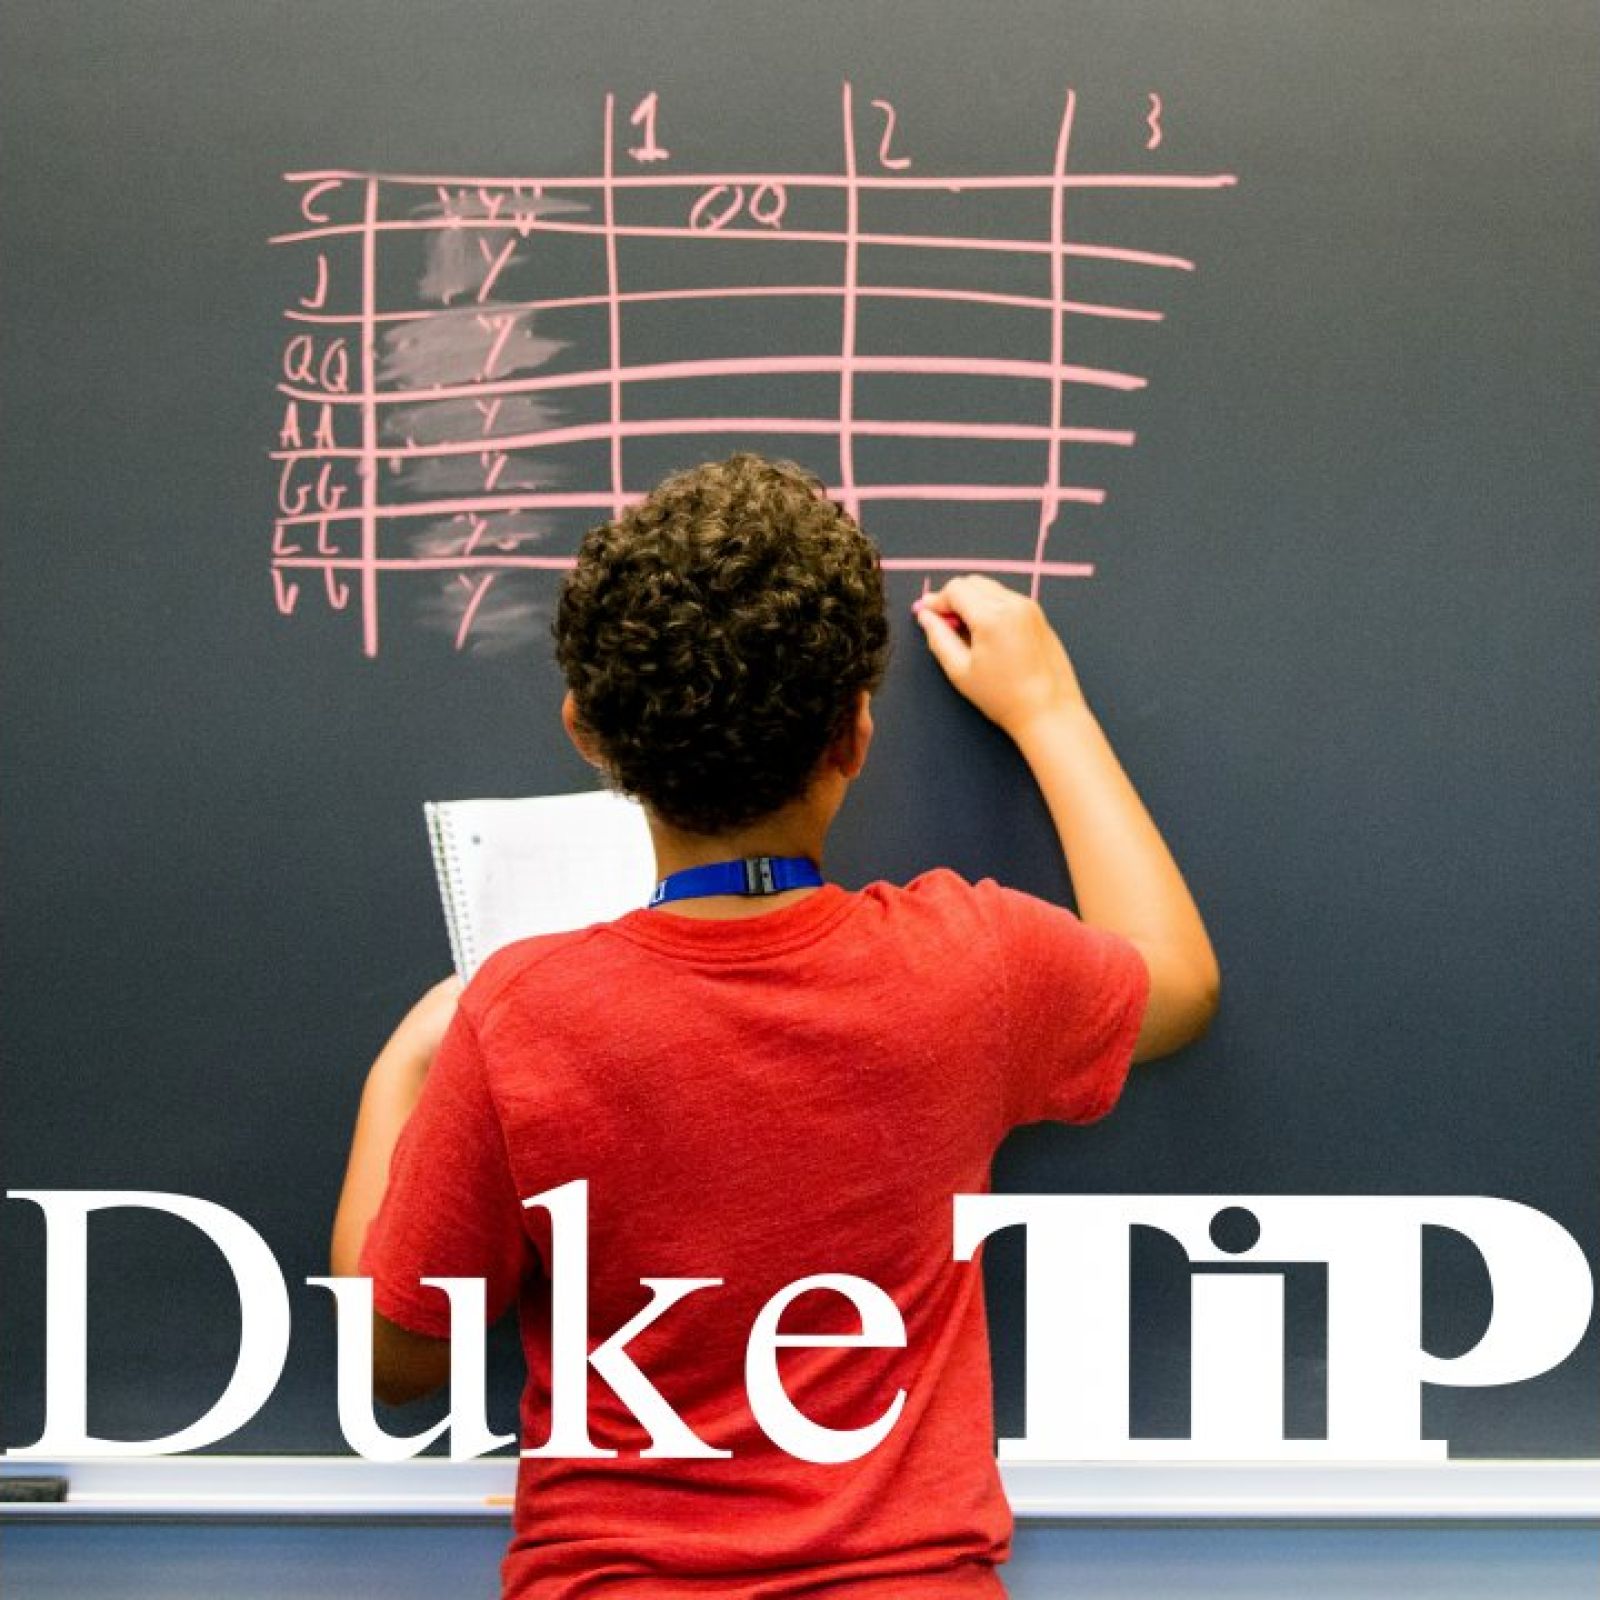 Special Summer Studies Admissions Episode of The Duke TIP Podcast